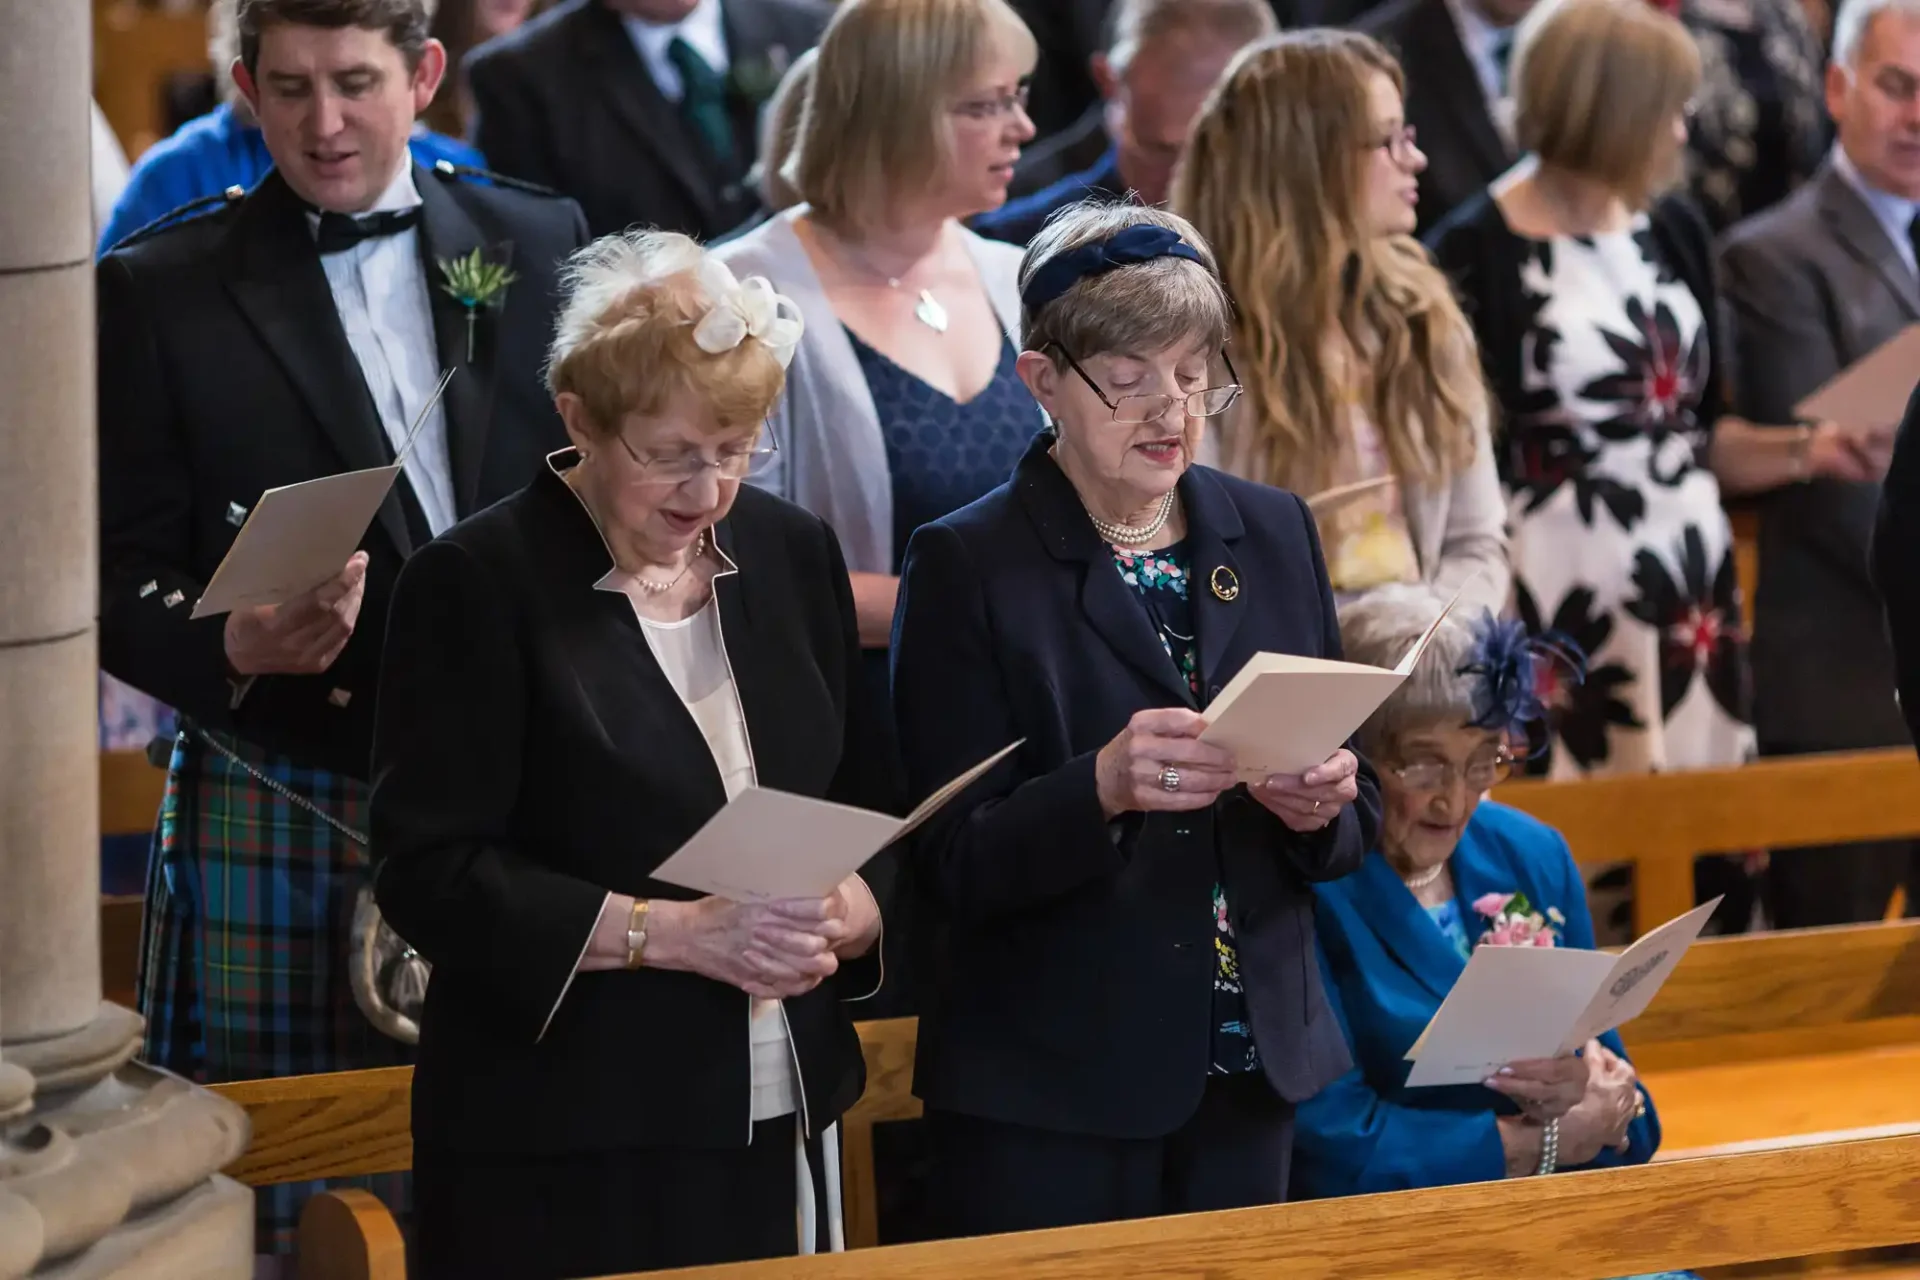 Two elderly women reading from hymnals during a church service, surrounded by other attendees in formal attire.